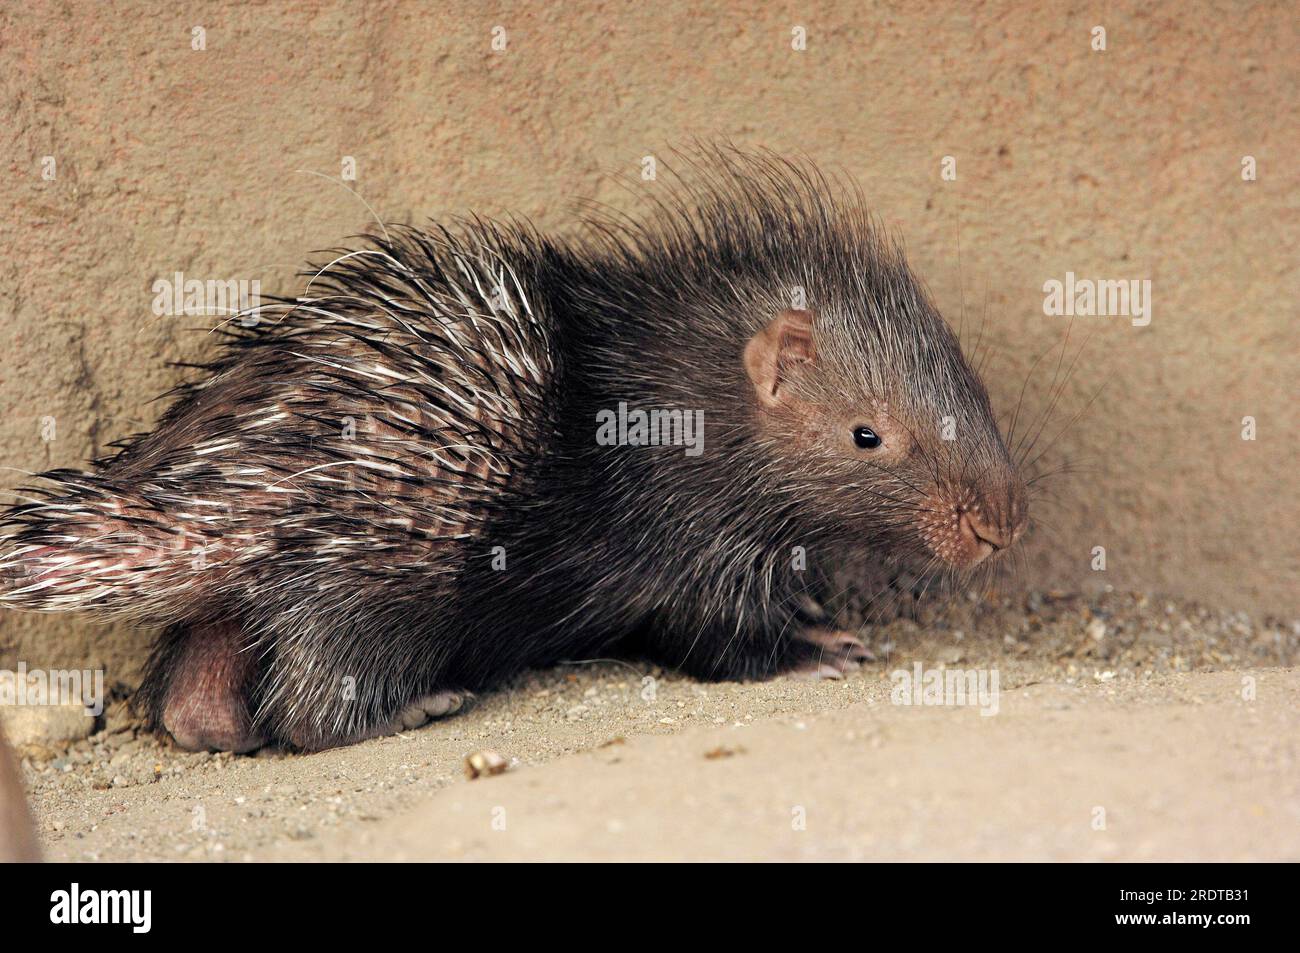 Young Indian Porcupine (Hystrix leucura), Indian Crested PorcupineÂ Stock Photo